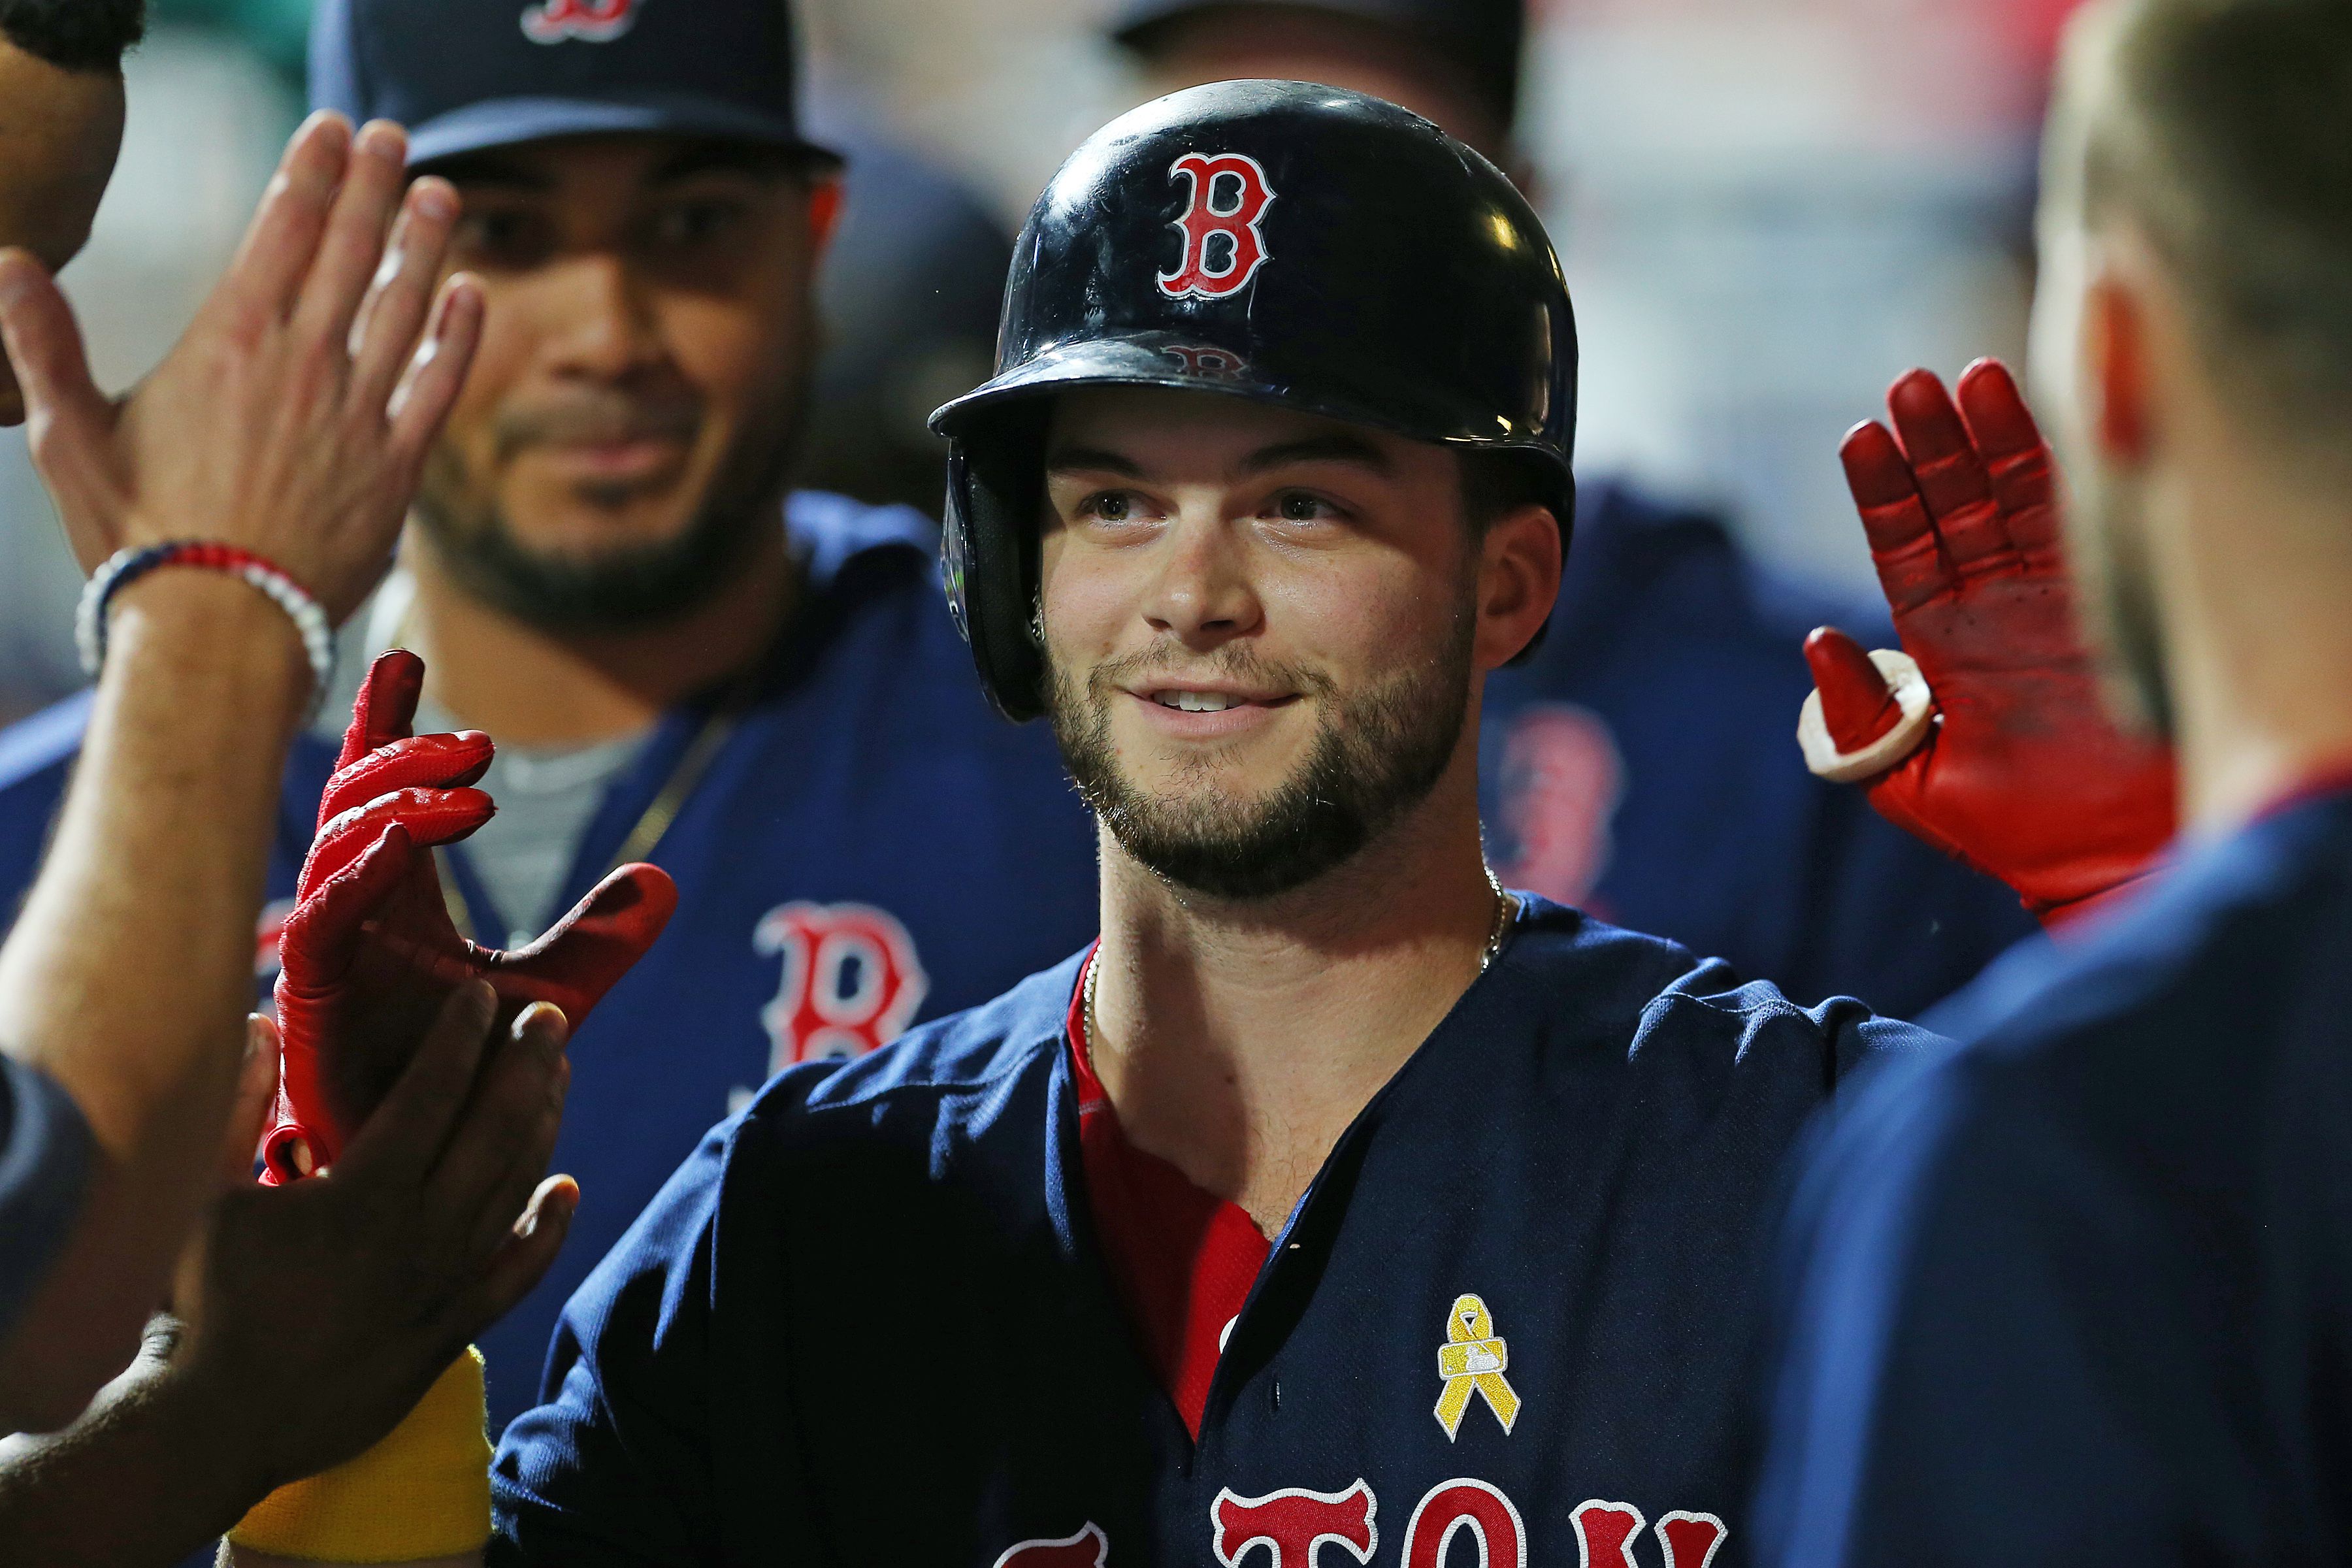 Benintendi, Red Sox agree on two-year $10m deal - The Boston Globe